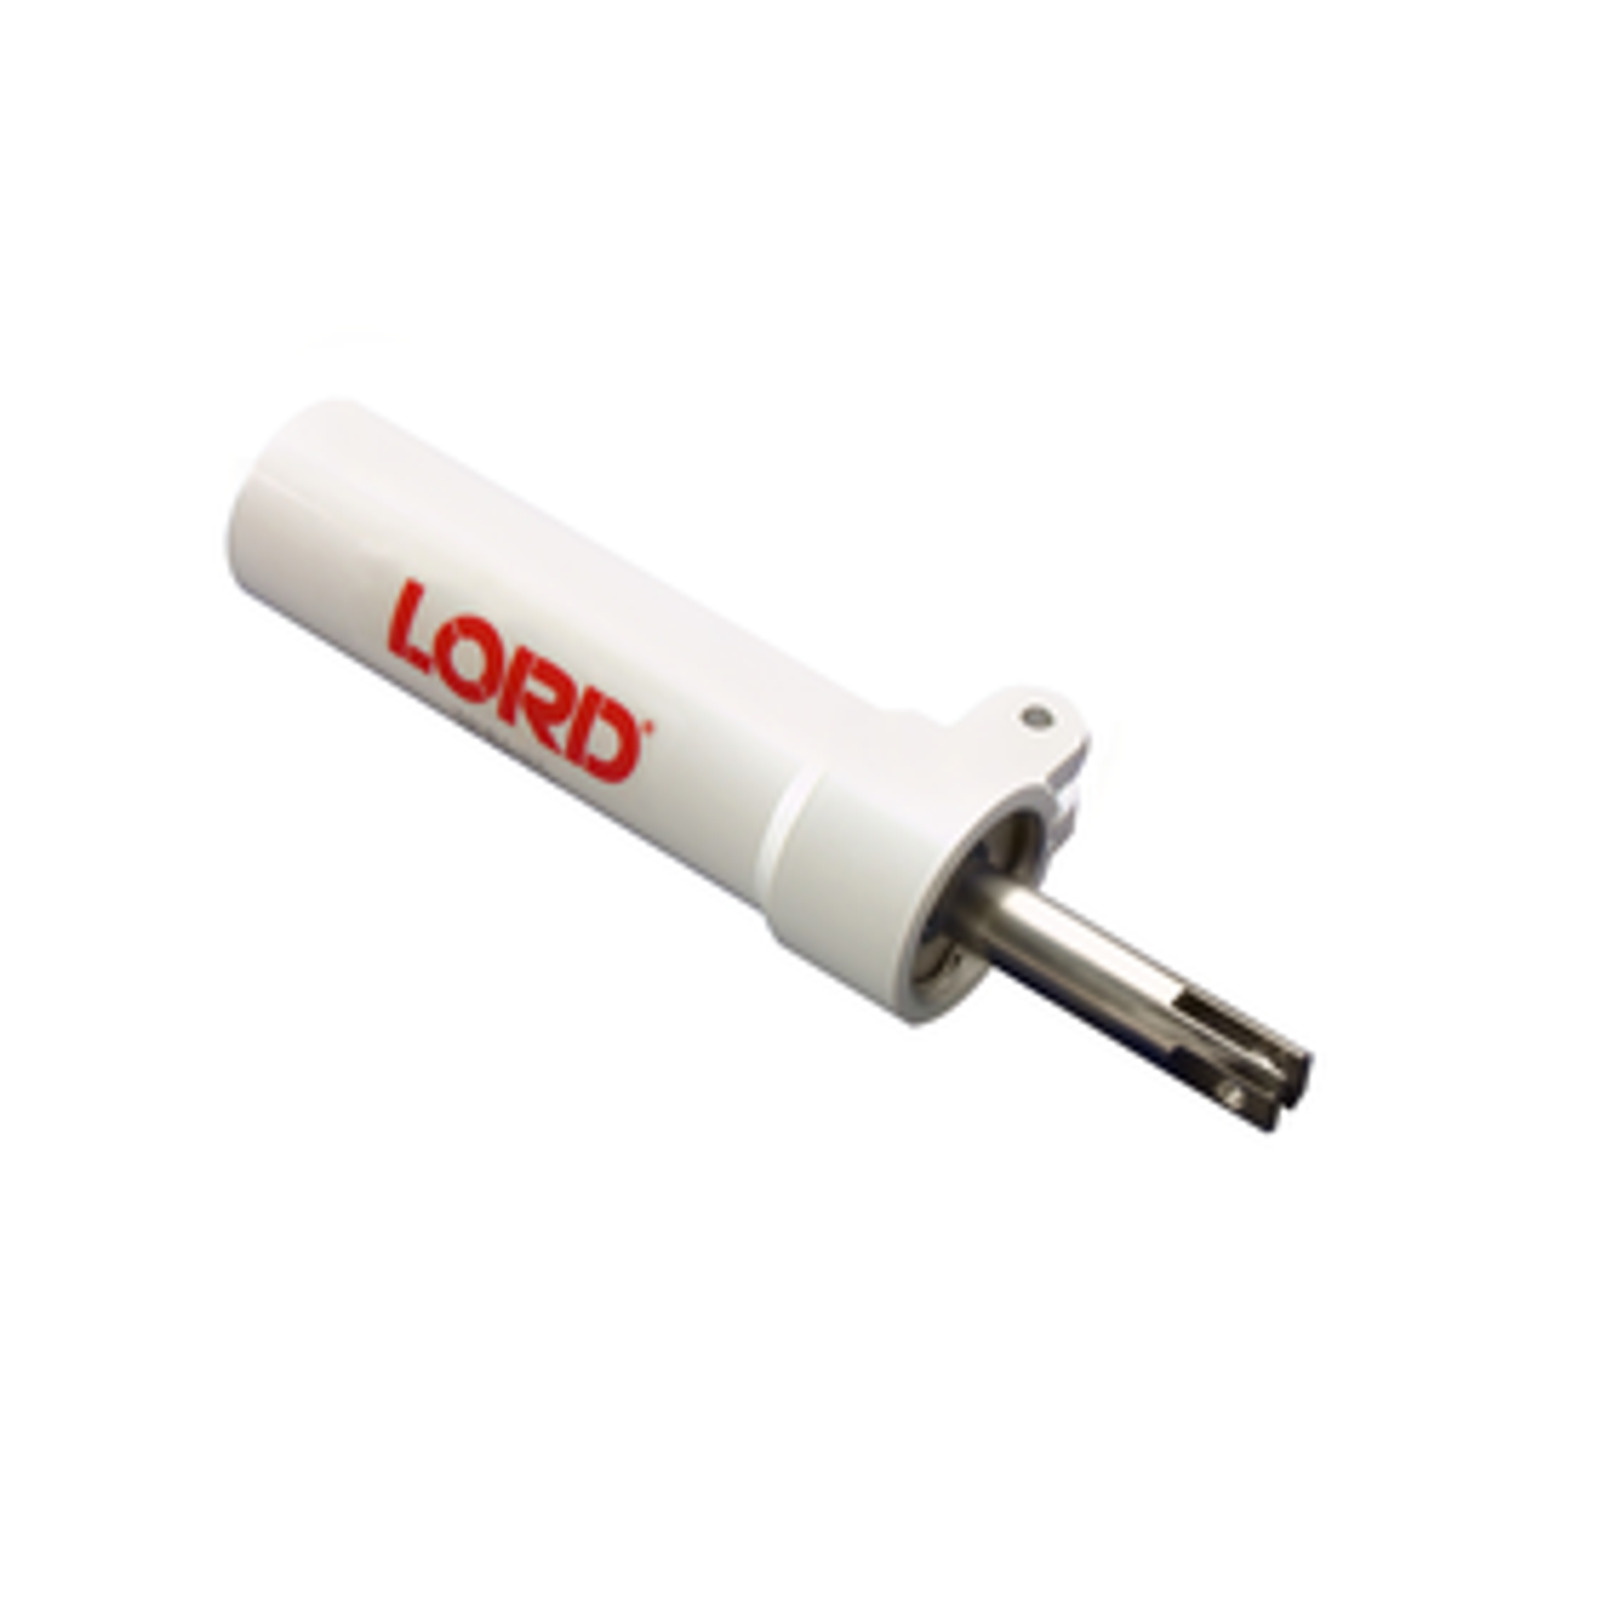 LORD Fluid-Free Aircraft Shimmy Damper